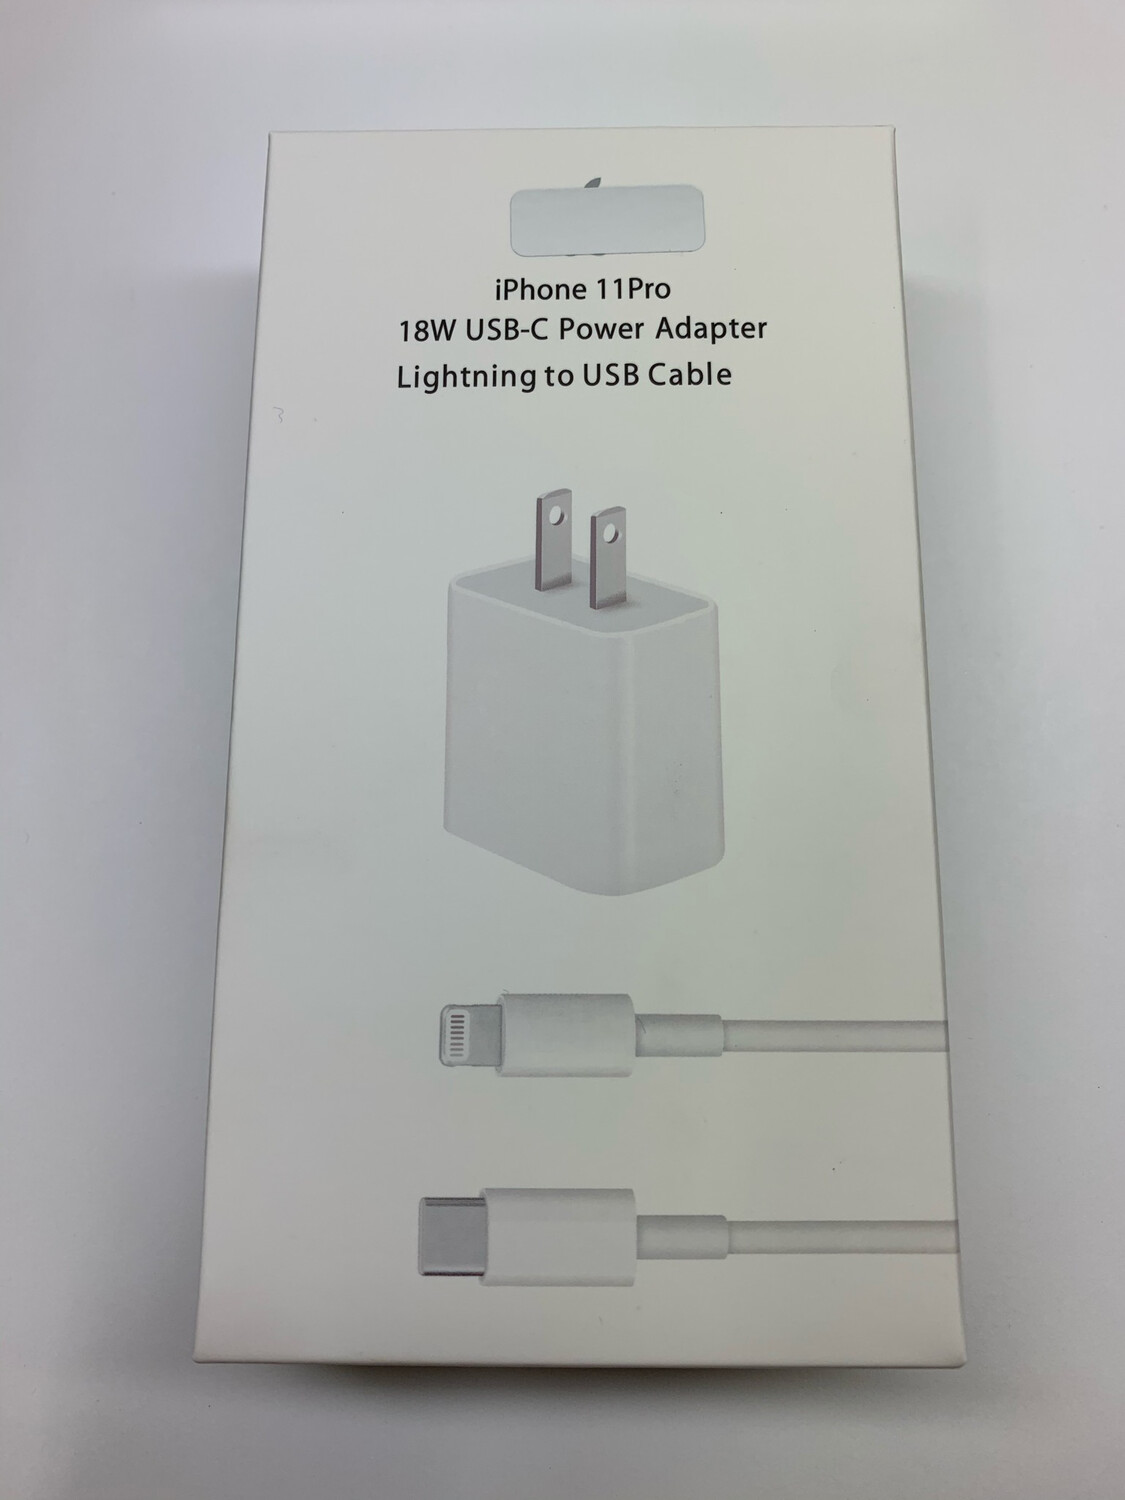 Iphone 11pro 18W USB-C Power Adapter Lightning to USB Cable